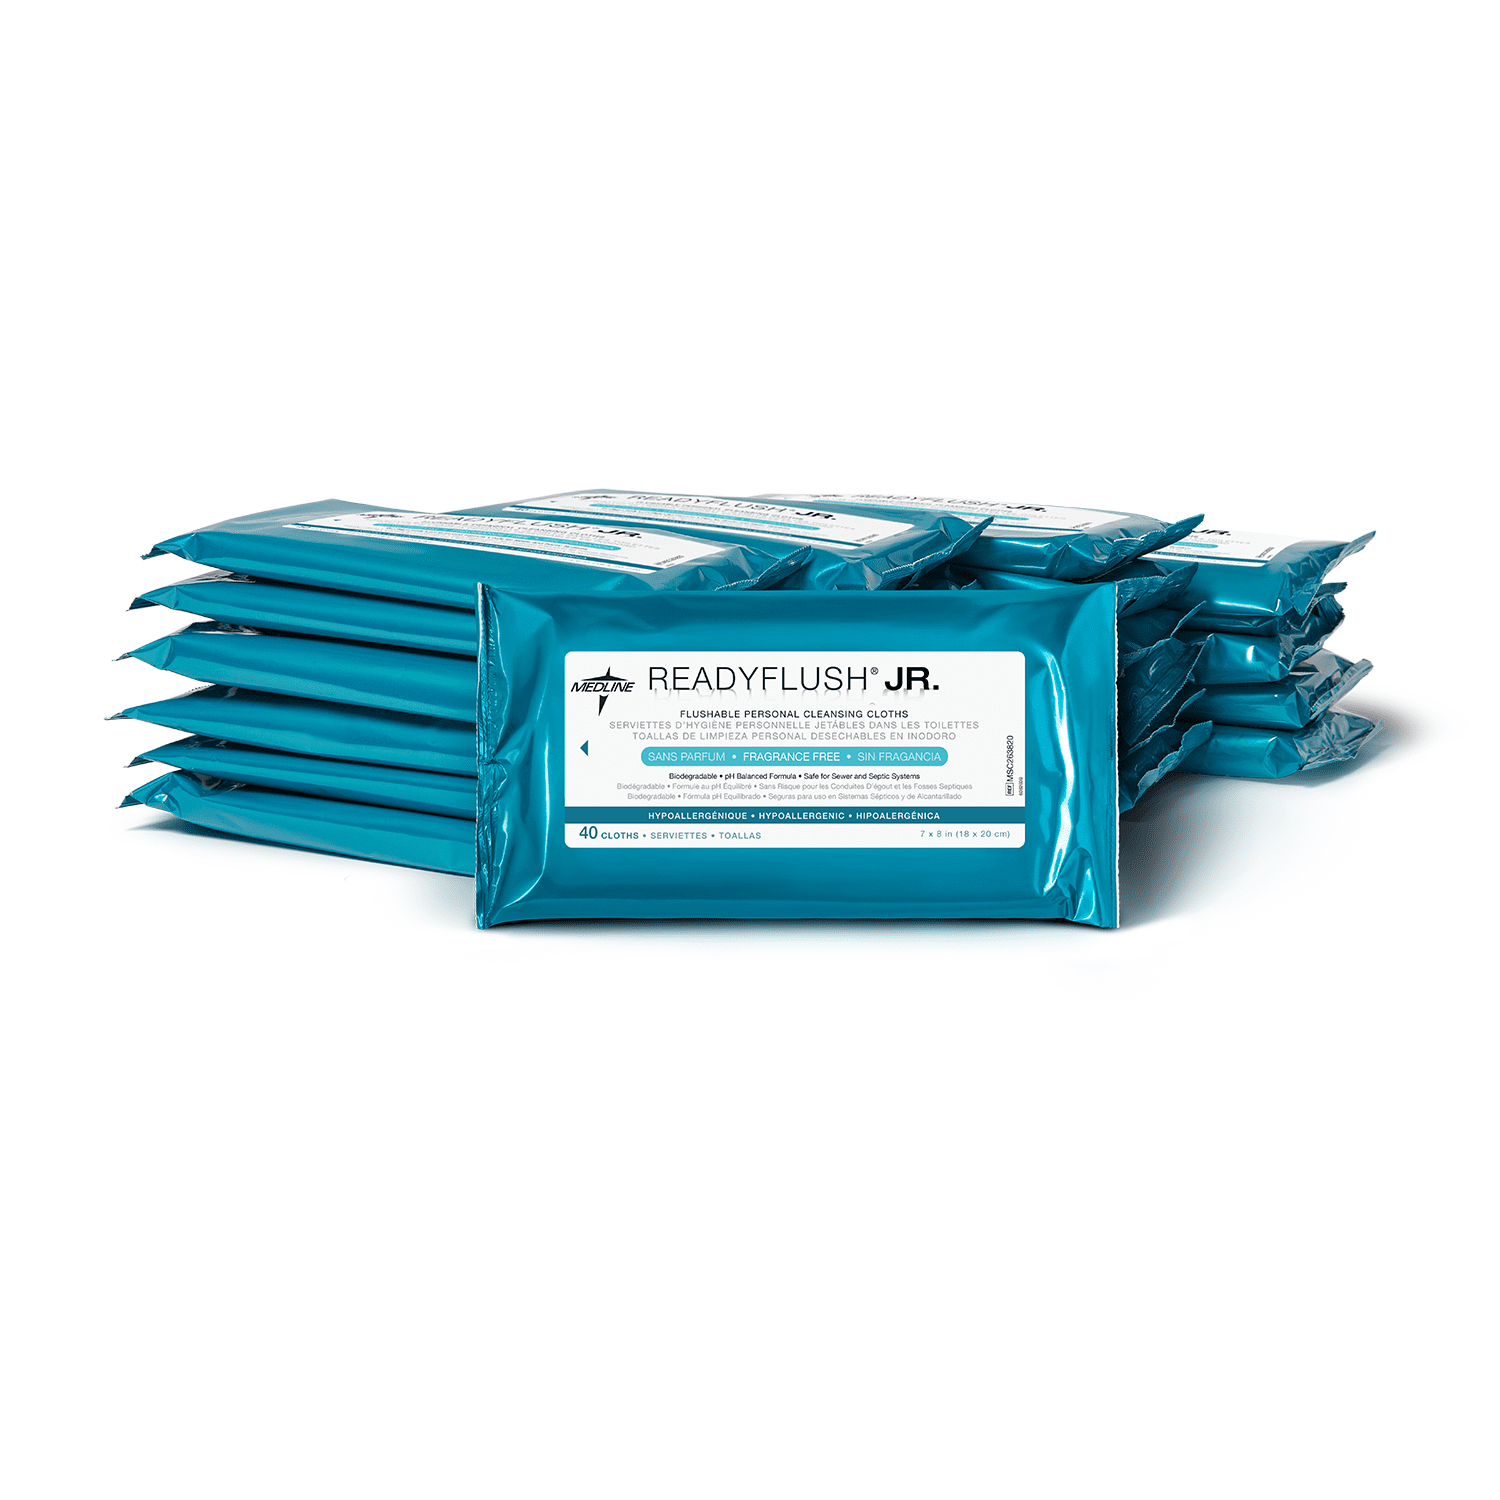 Miracle Wipes › Ropamate - Endless Quality